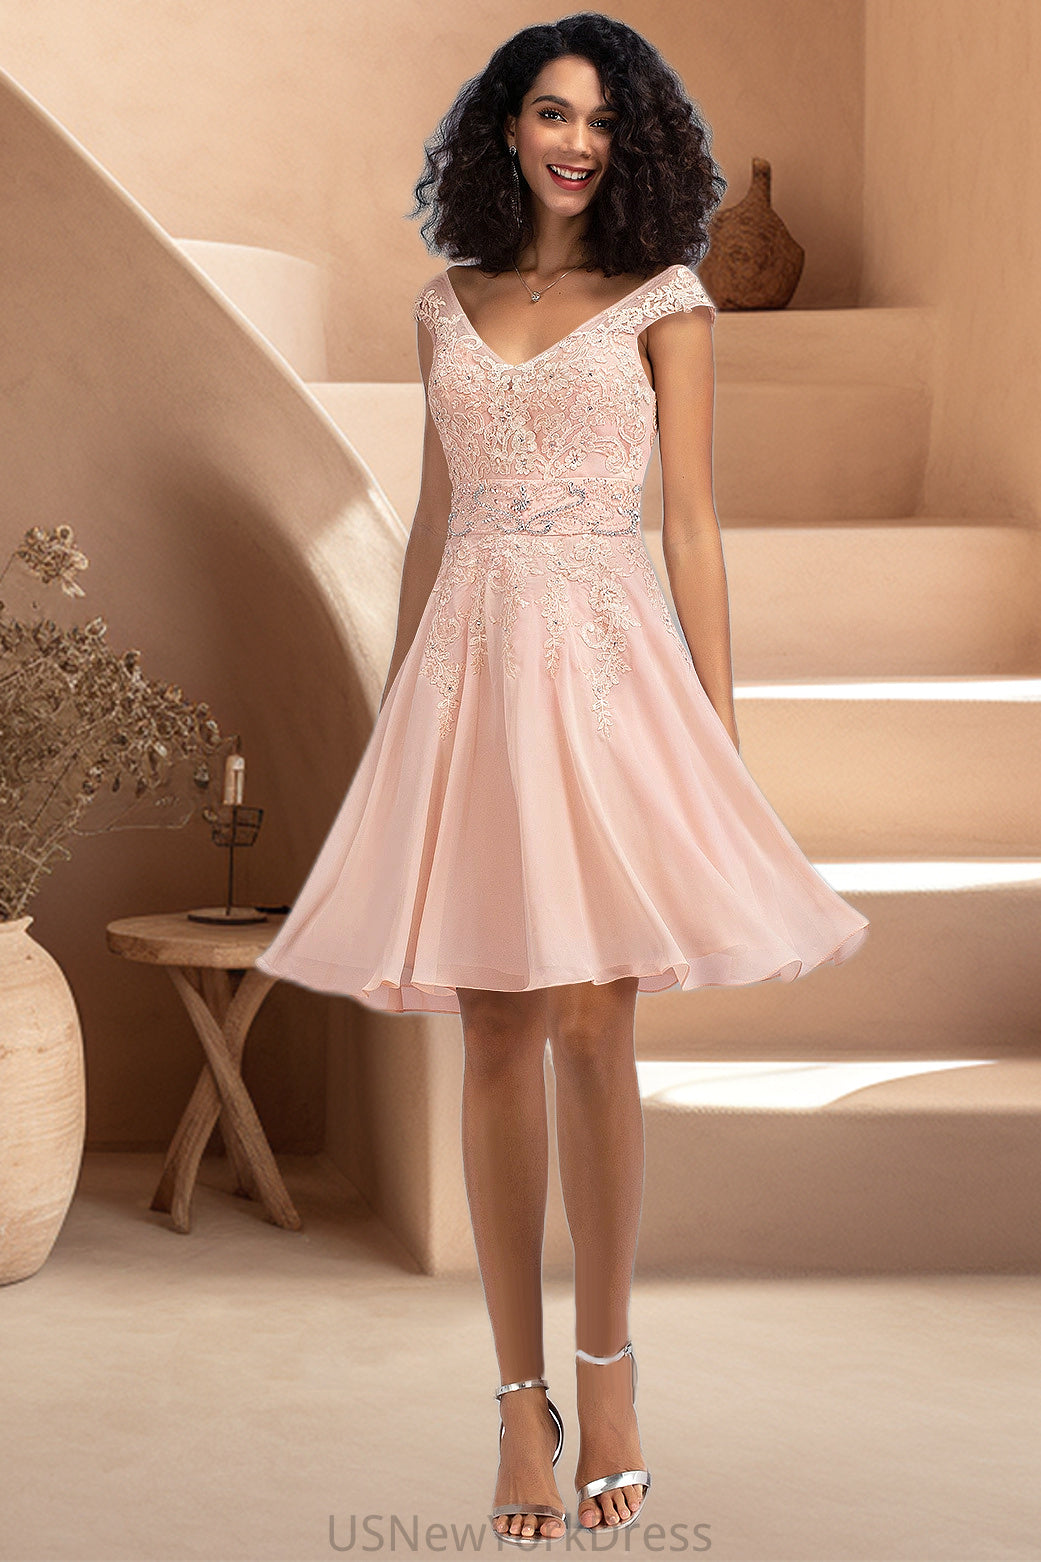 Willow A-line V-Neck Knee-Length Chiffon Lace Homecoming Dress With Beading DJP0020565